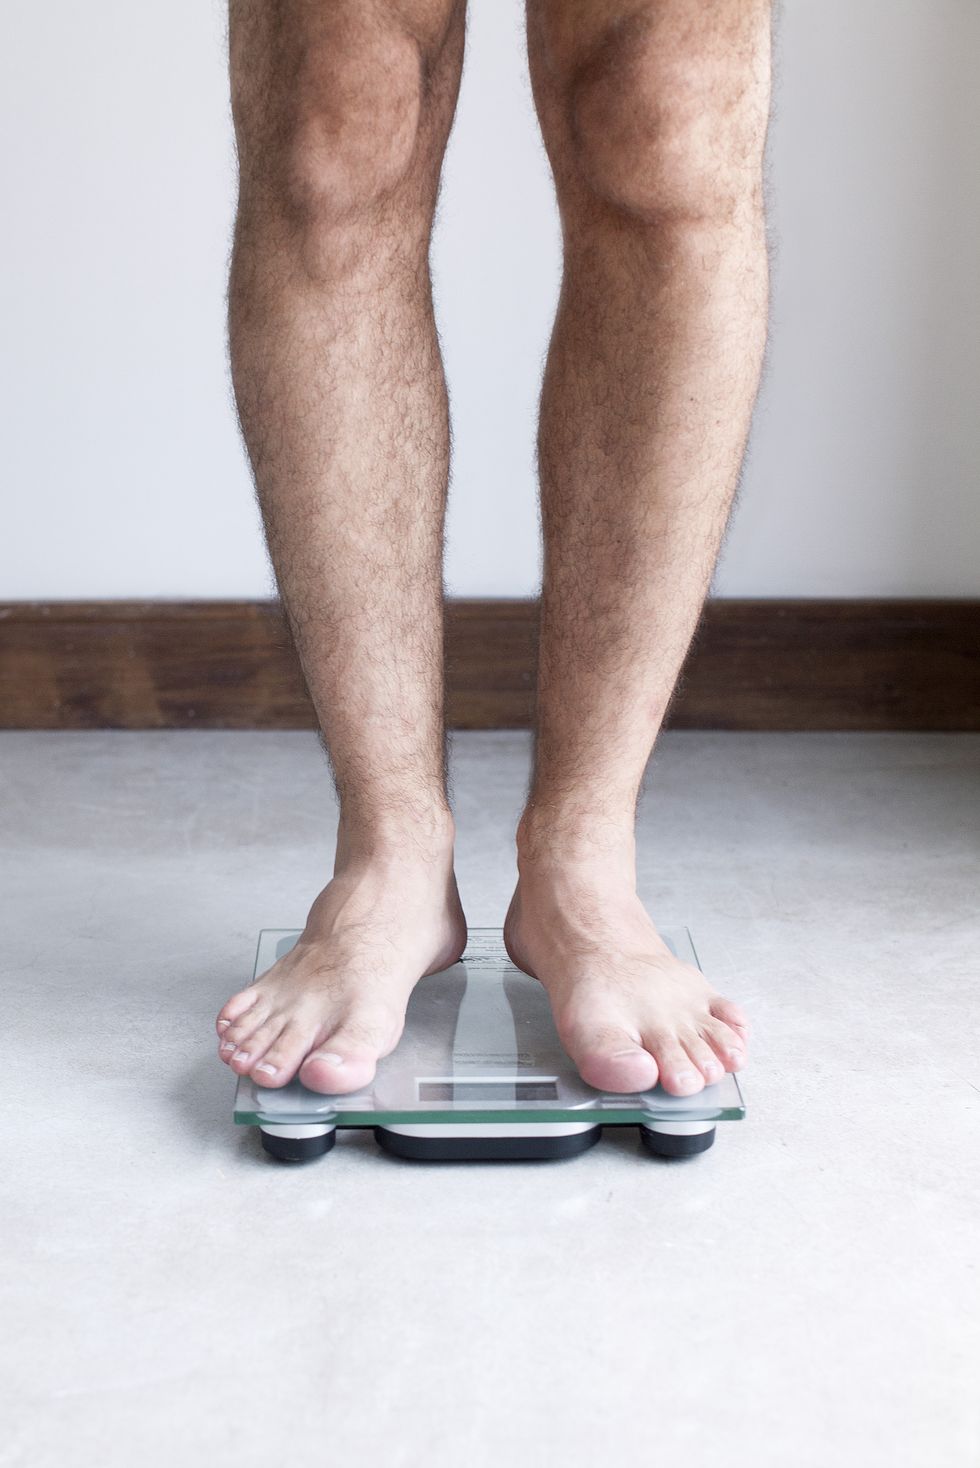 How Accurate is Your At-Home Body Fat Scale? Our New Research Study Can  Tell You.